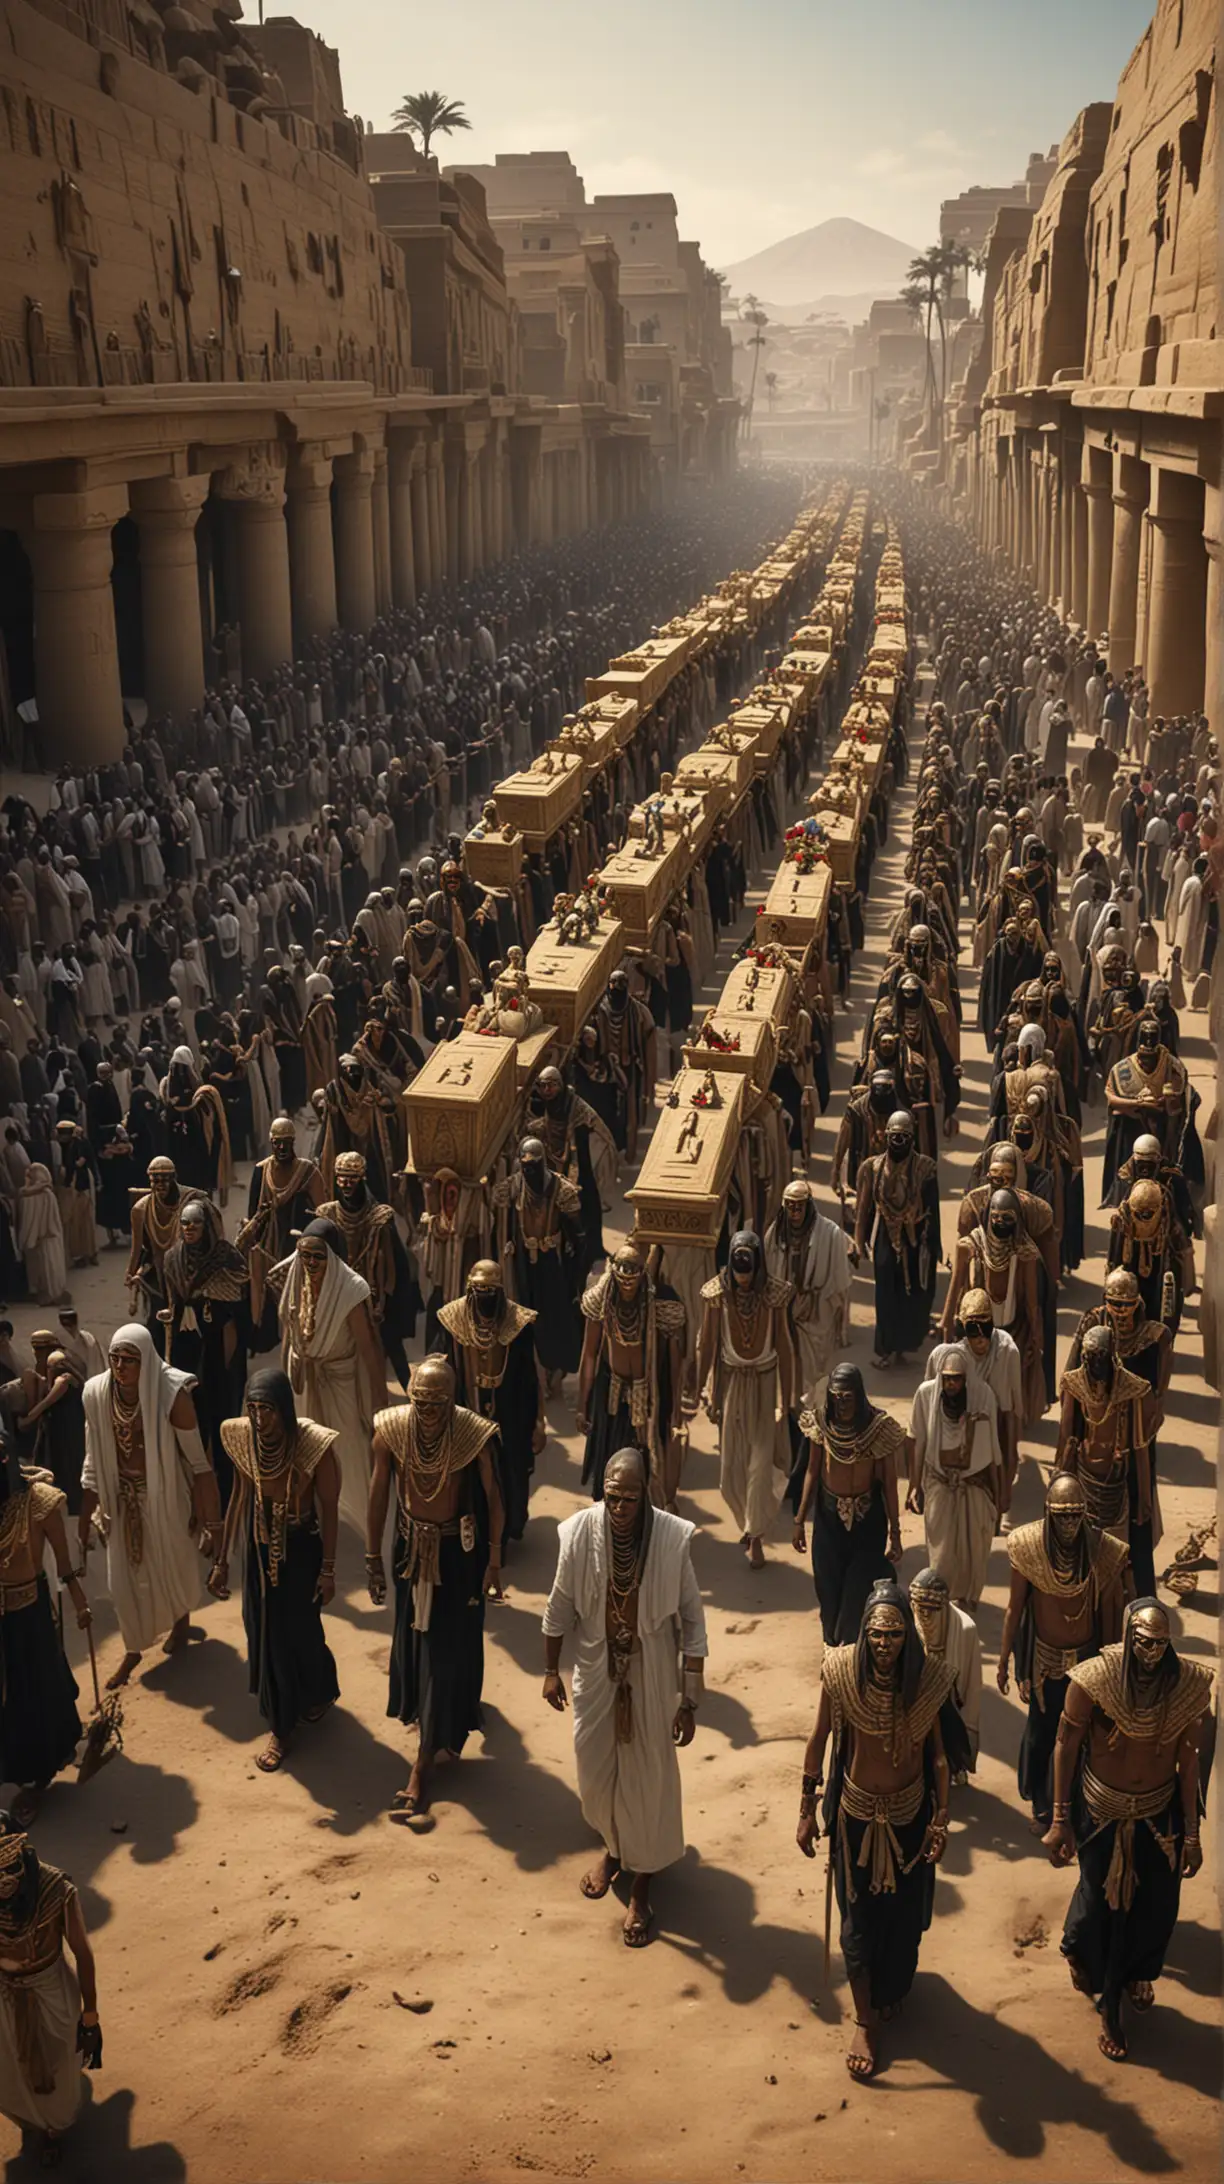 The Procession of the Dead: Depict an ancient Egyptian funeral procession, with mourners clad in traditional attire carrying offerings and ceremonial objects. Show the solemn atmosphere as they accompany the deceased to their final resting place. Hyper realistic